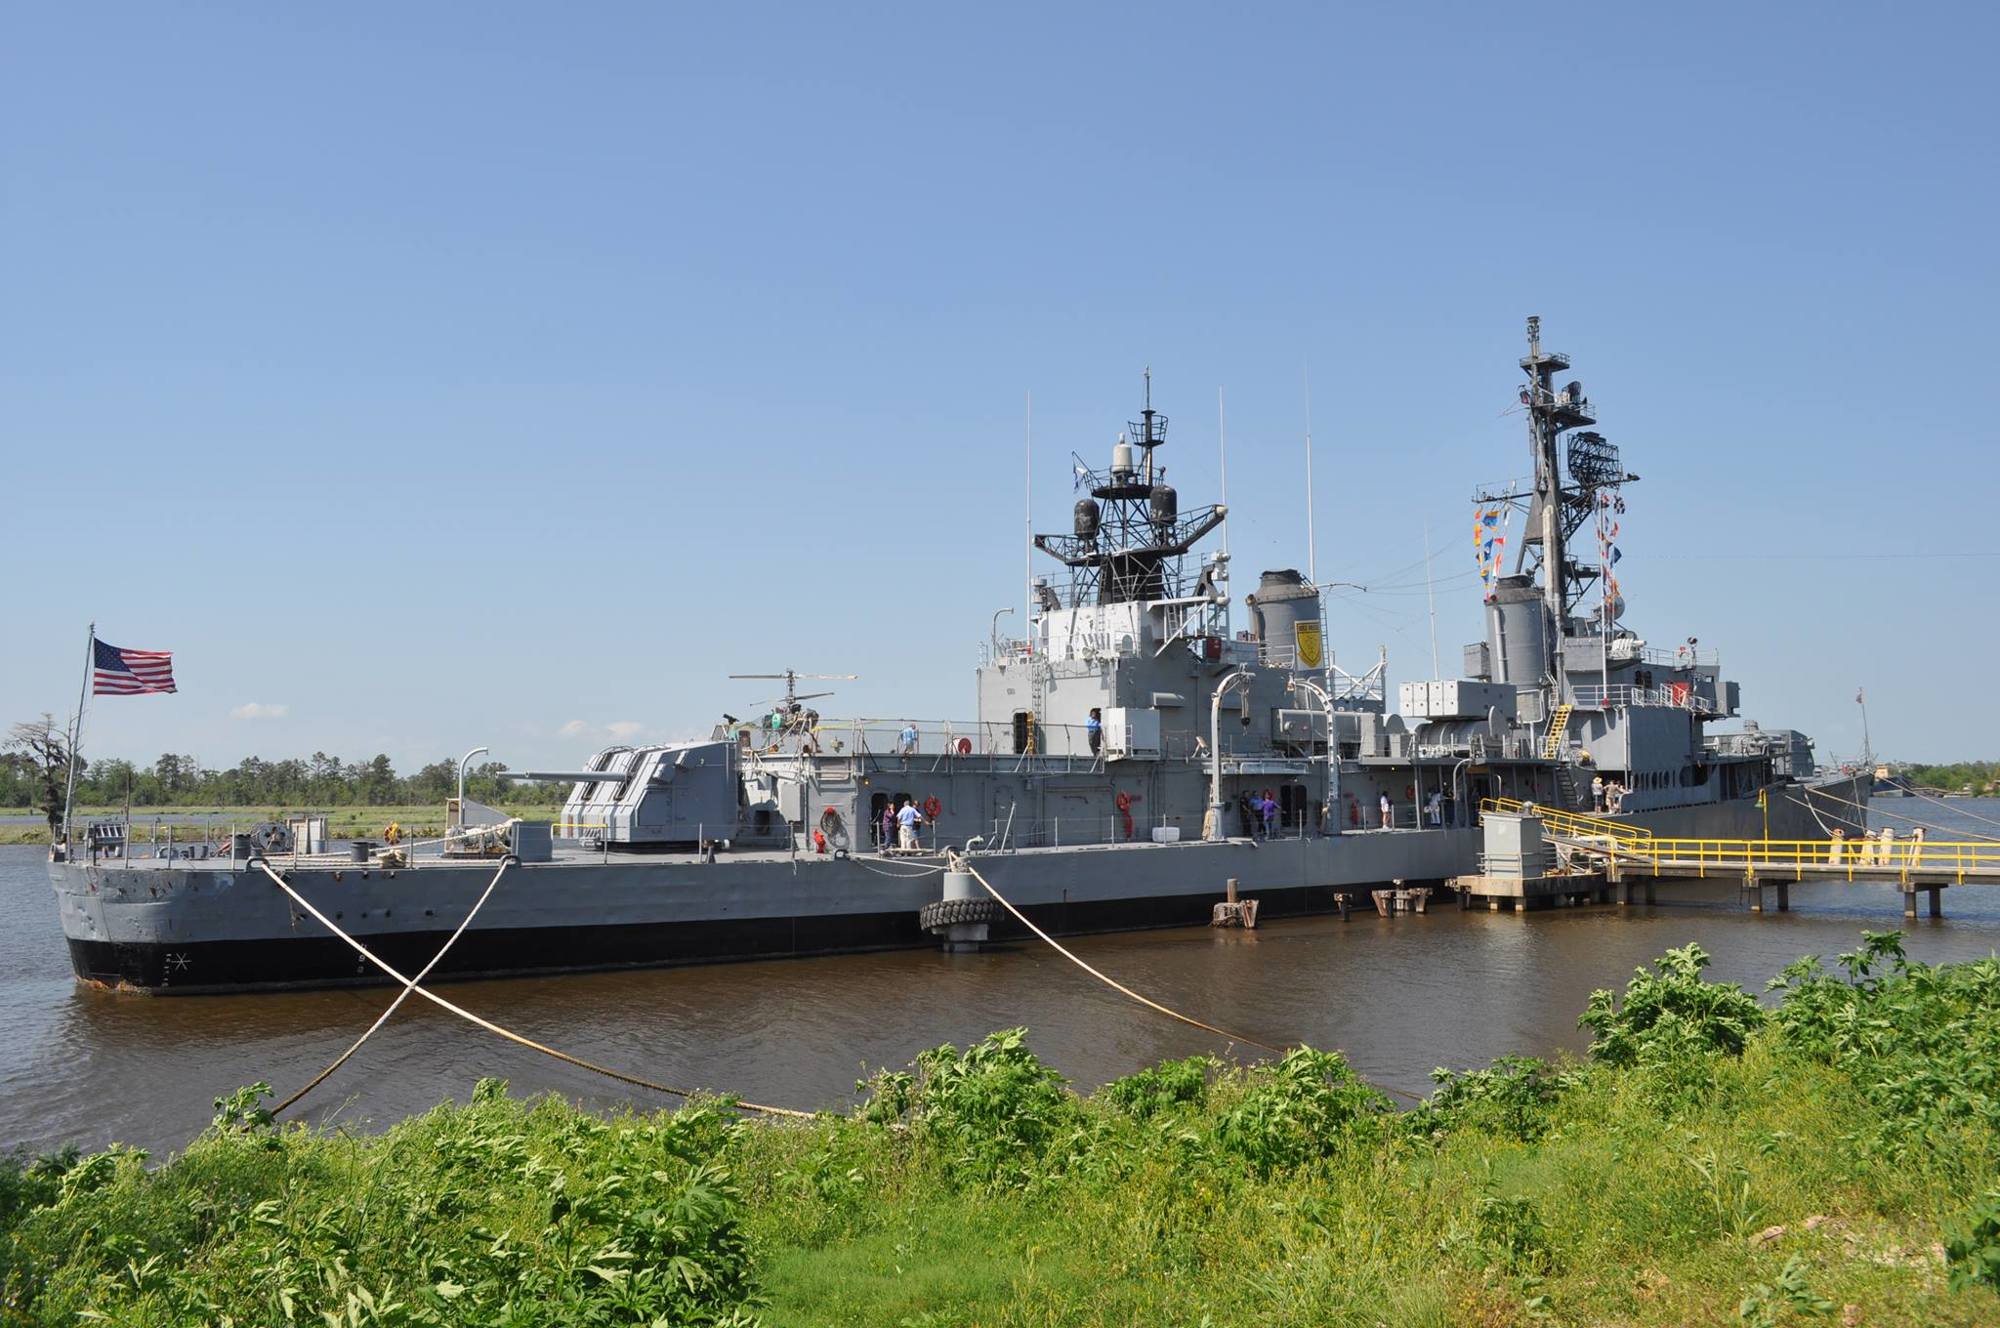 The USS Orleck opened as a naval museum in Lake Charles, Louisiana, in 2010.